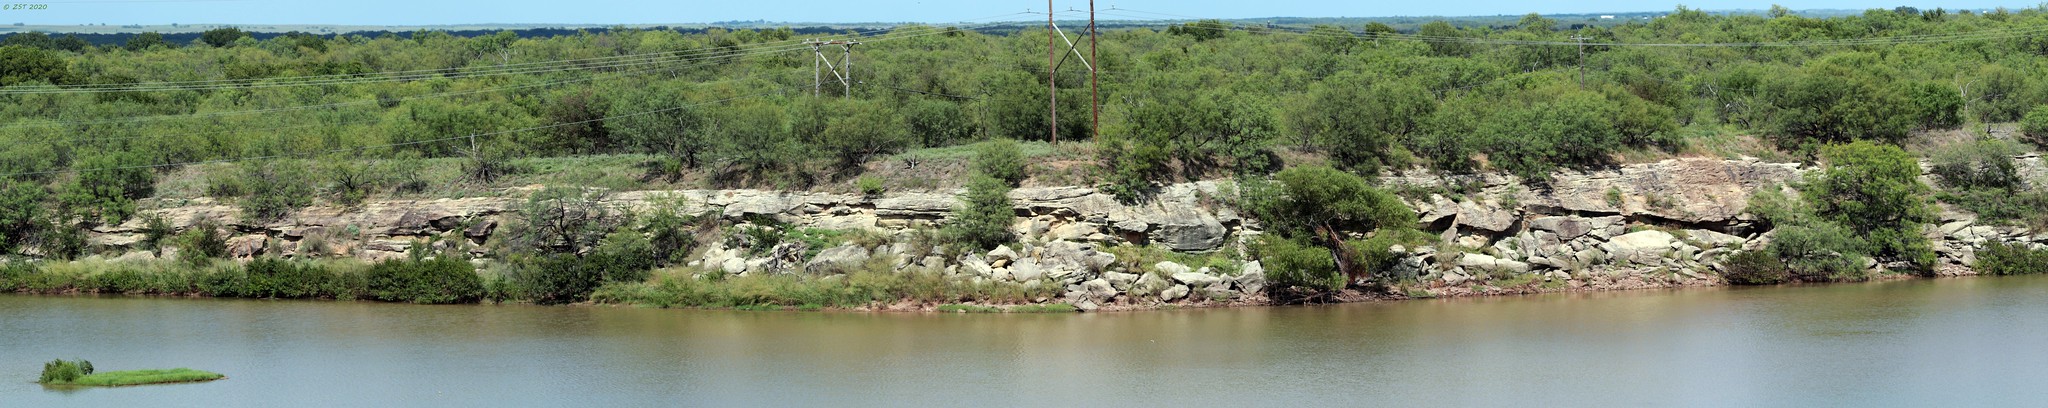 Photograph of an outcropping of the Permian Nocona Formation in Texas.